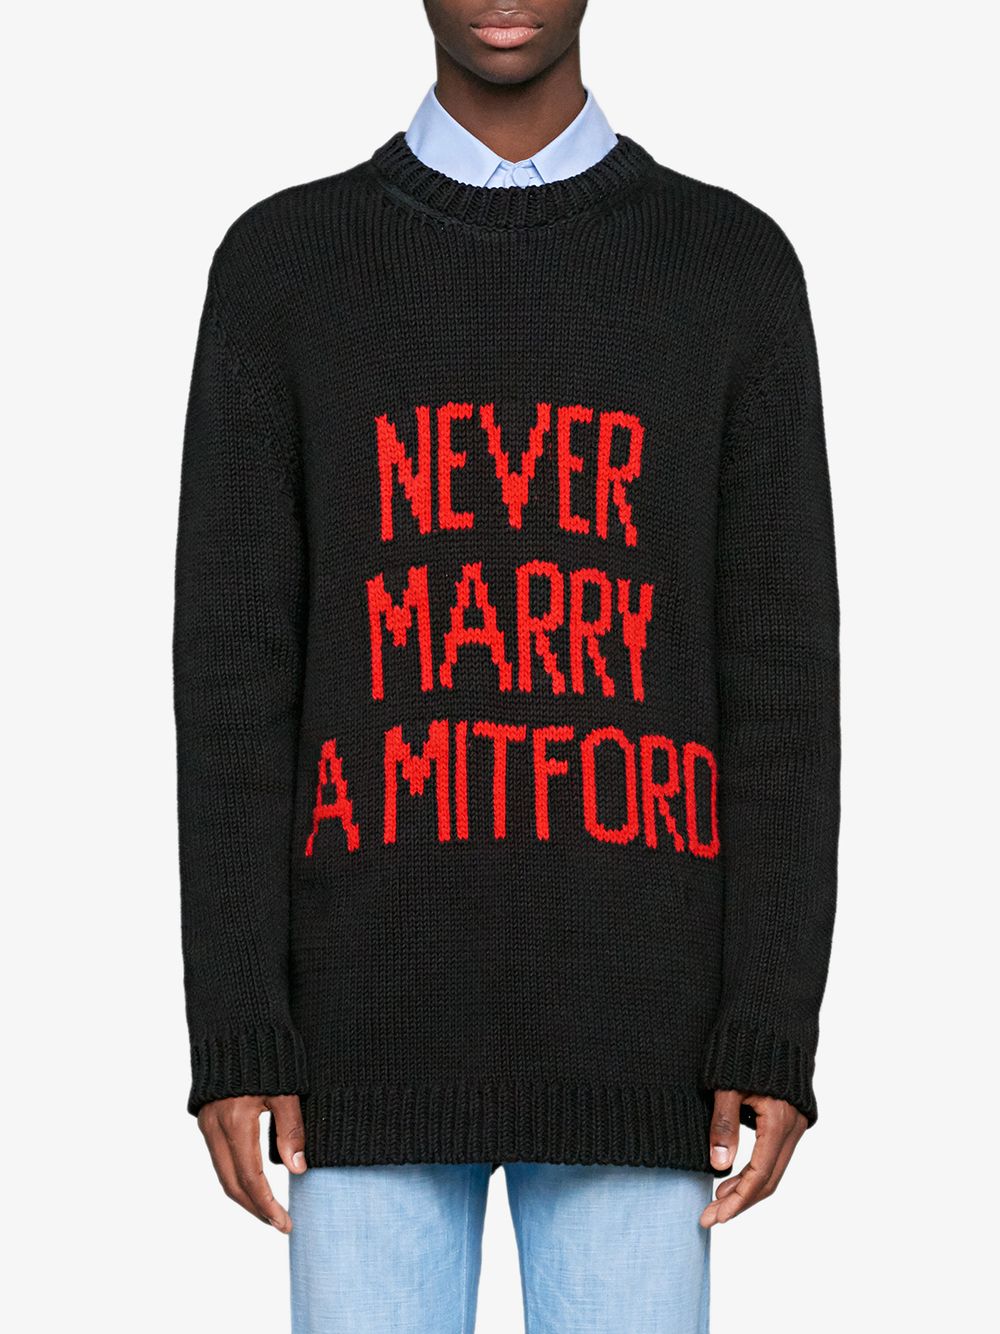 never marry a mitford sweater